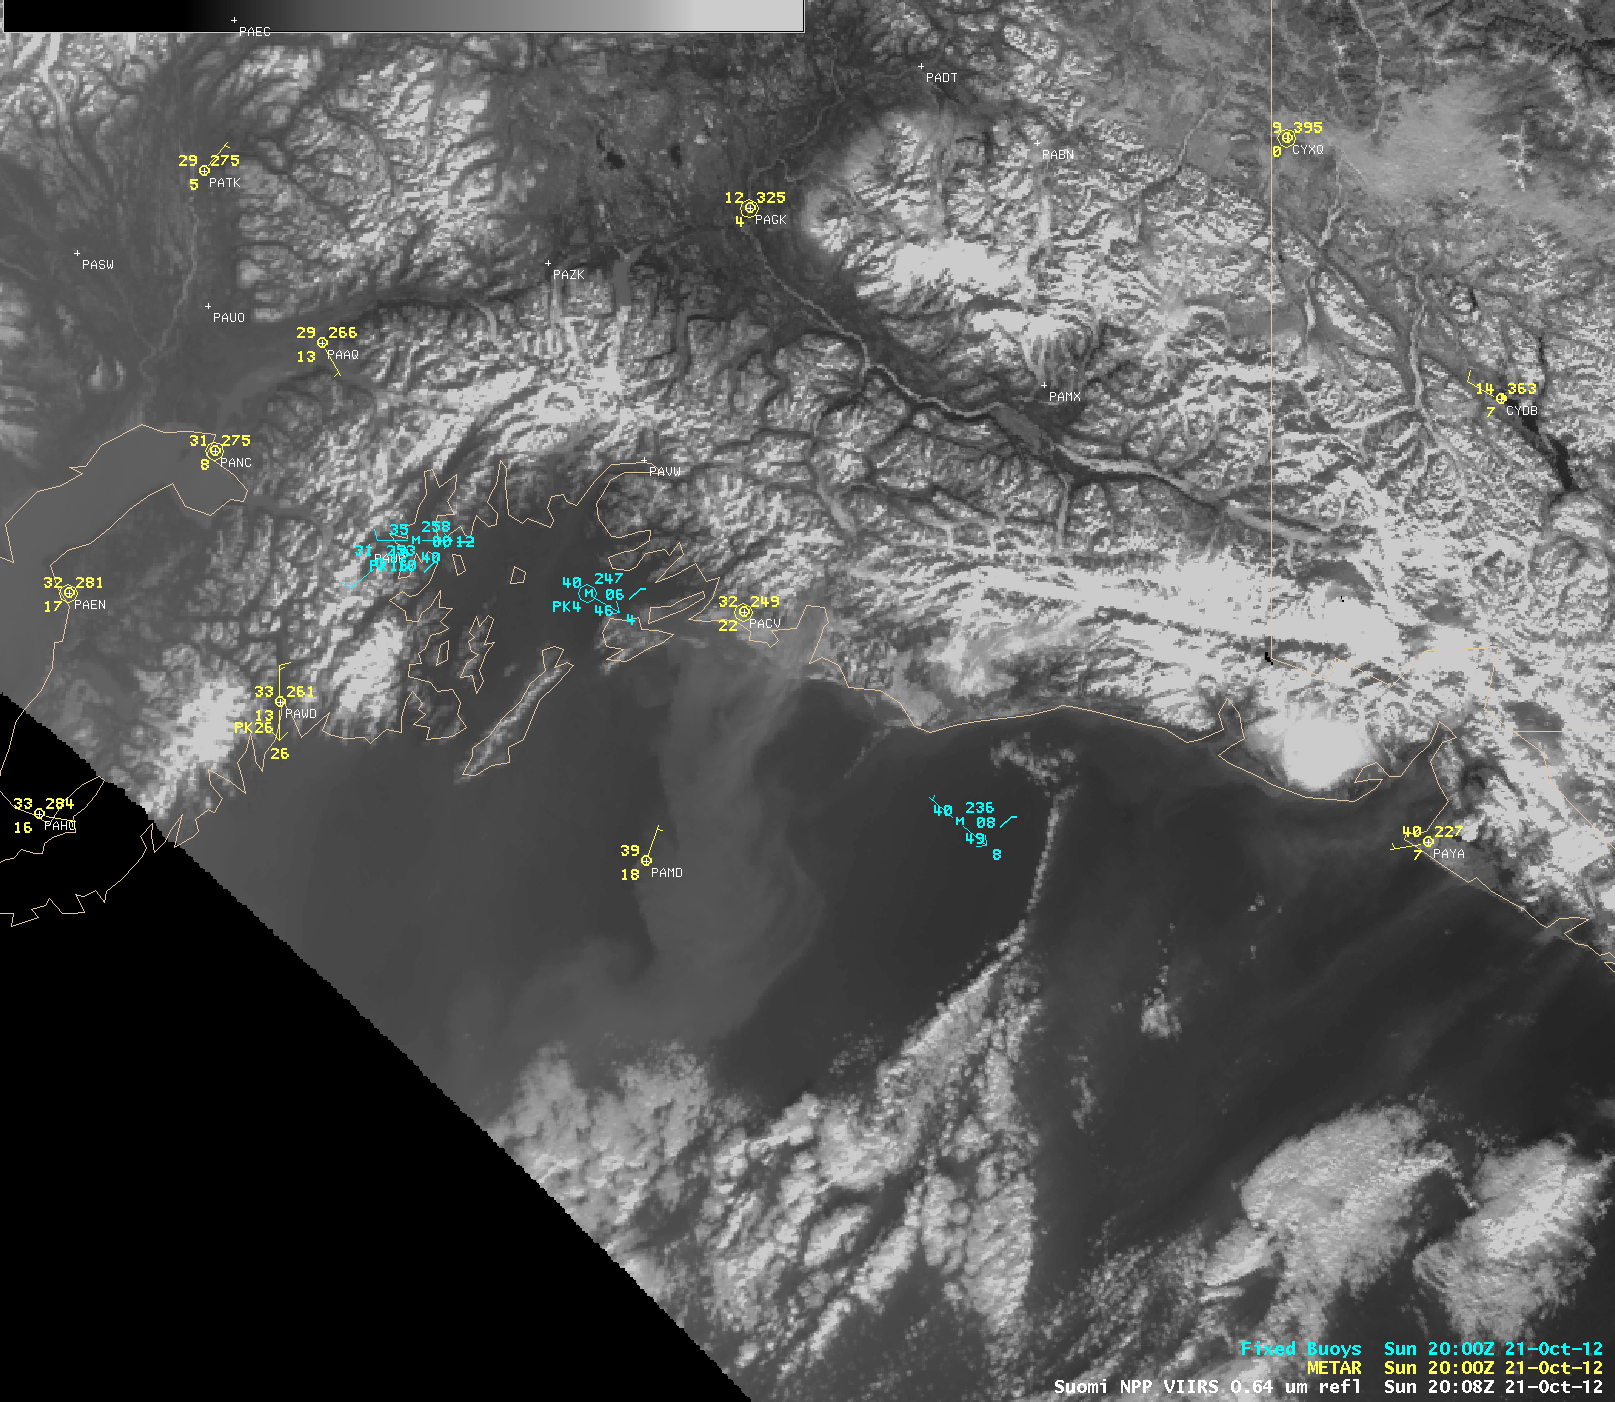 Suomi NPP VIIRS 0.64 Âµm visible channel images